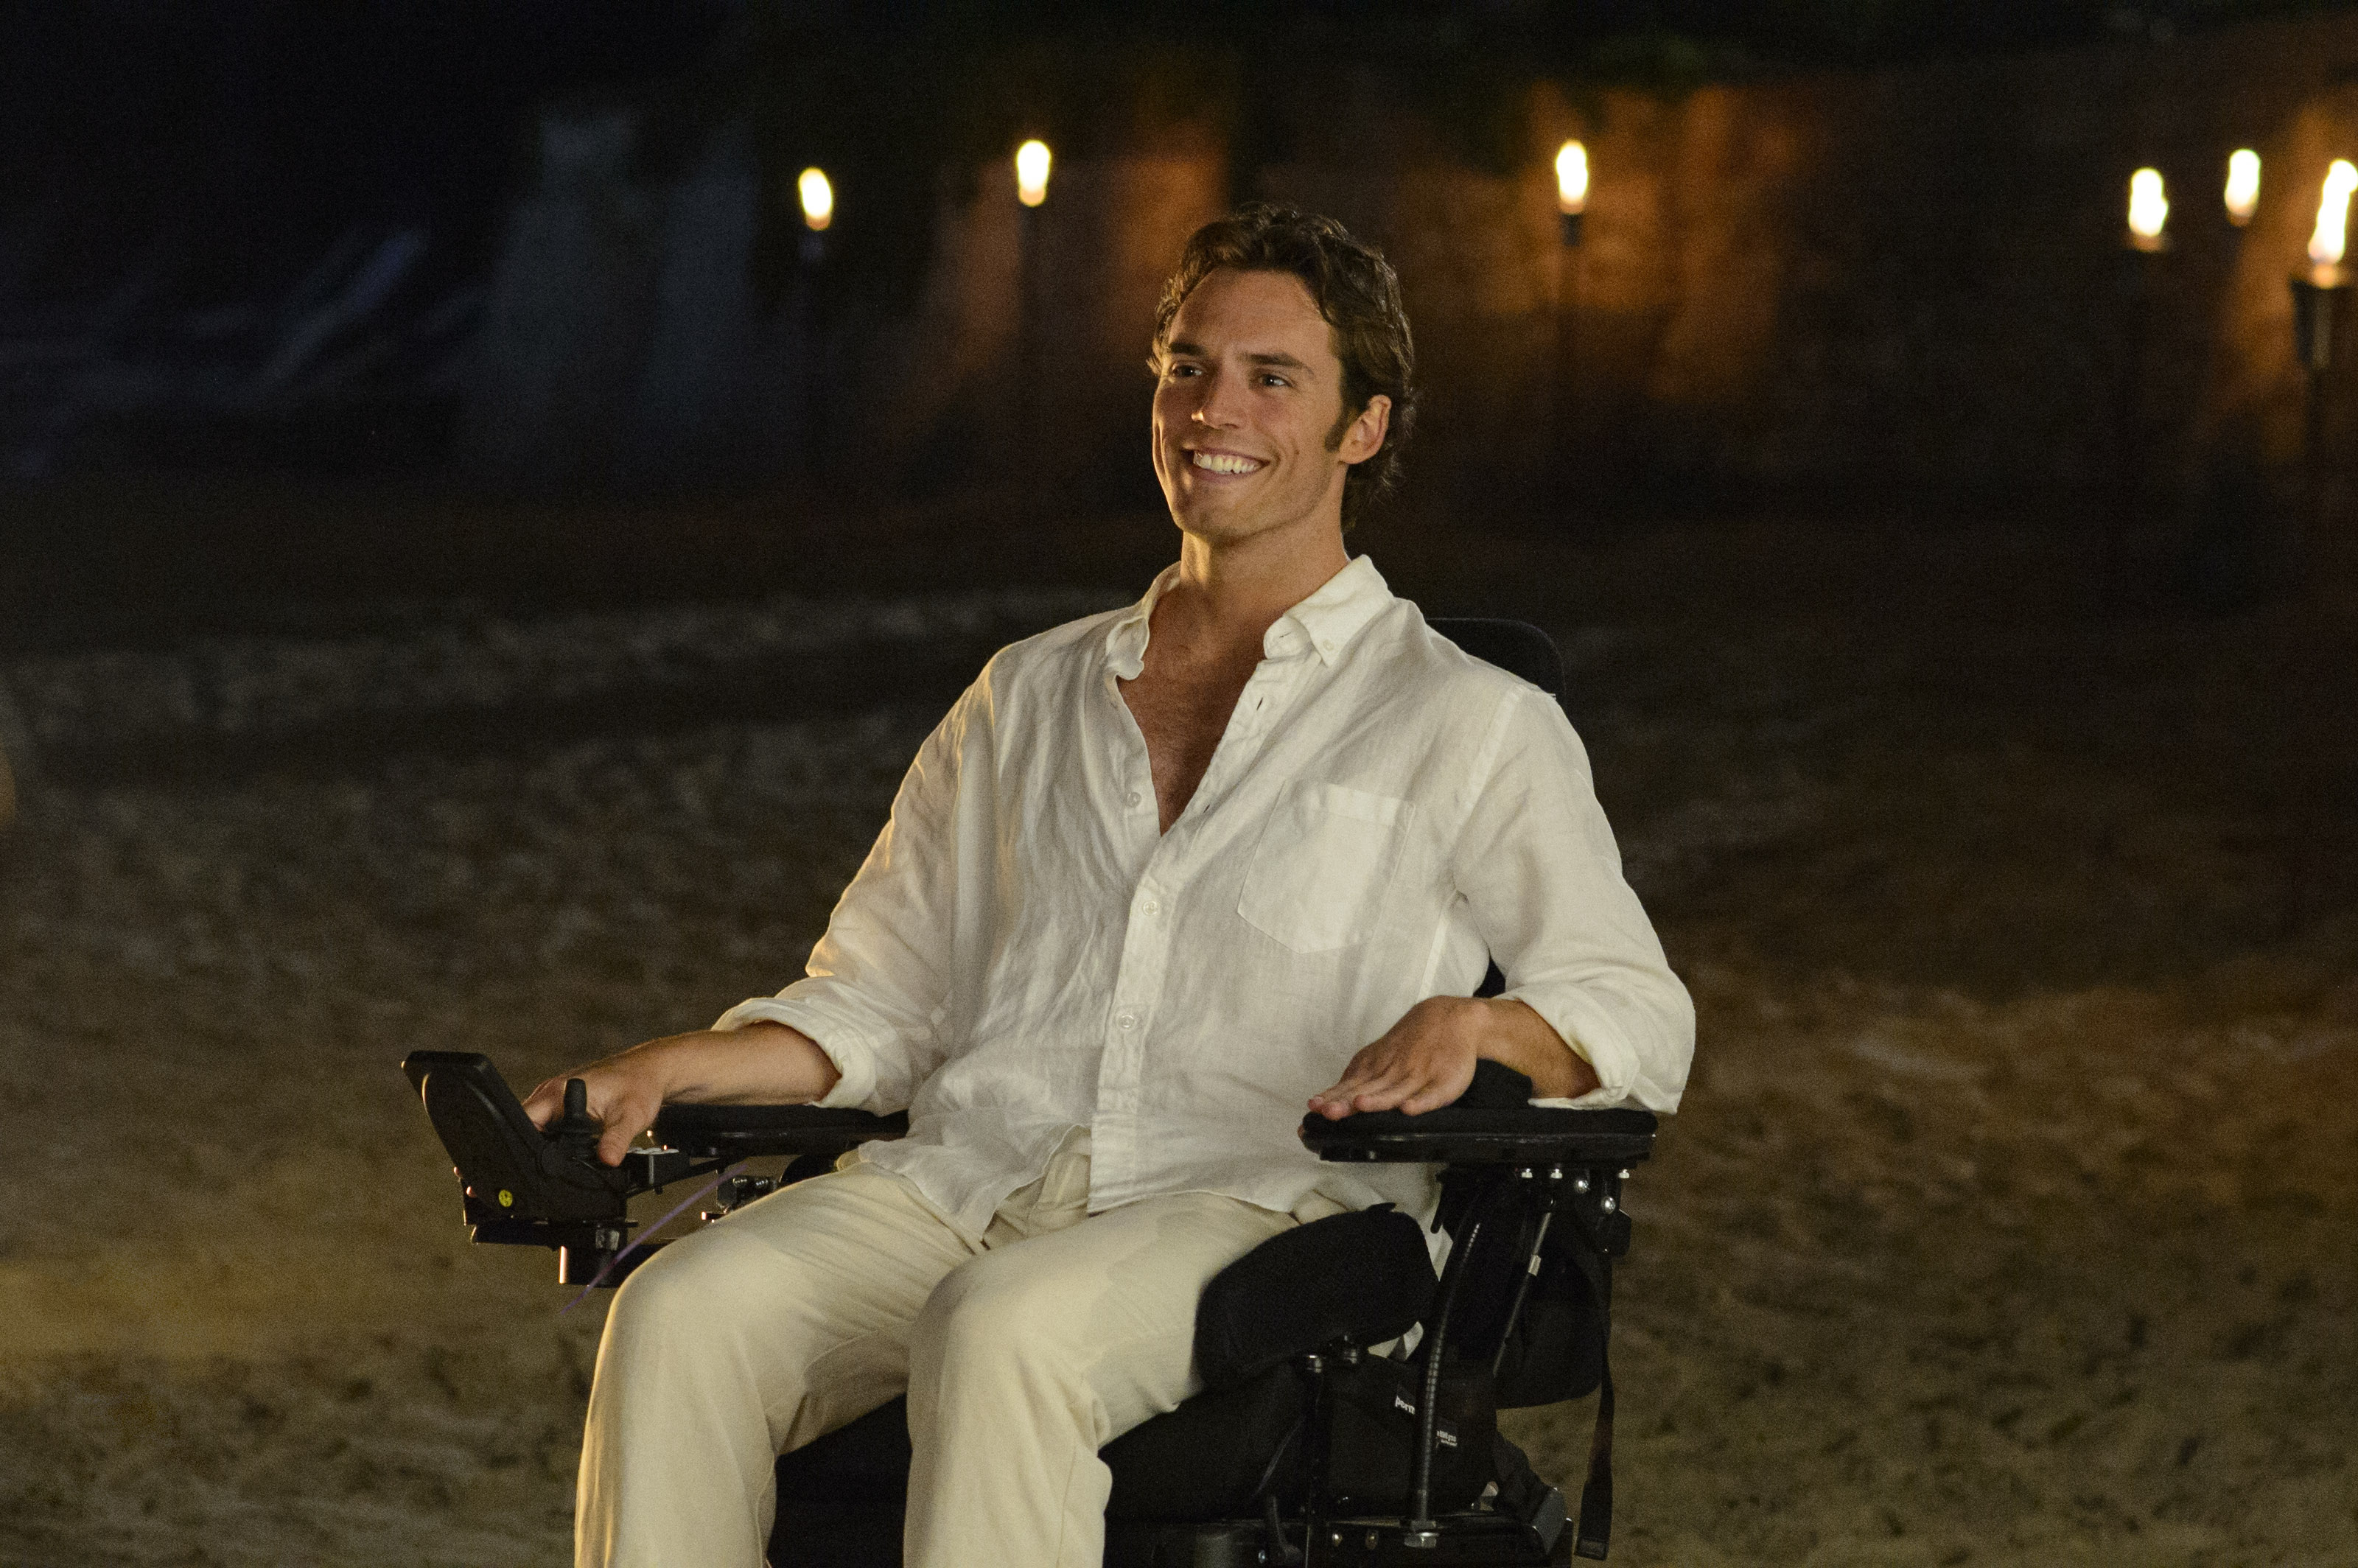 Me Before You (Movie), HD wallpaper and background image, Emotional journey, Unforgettable moments, 3200x2130 HD Desktop